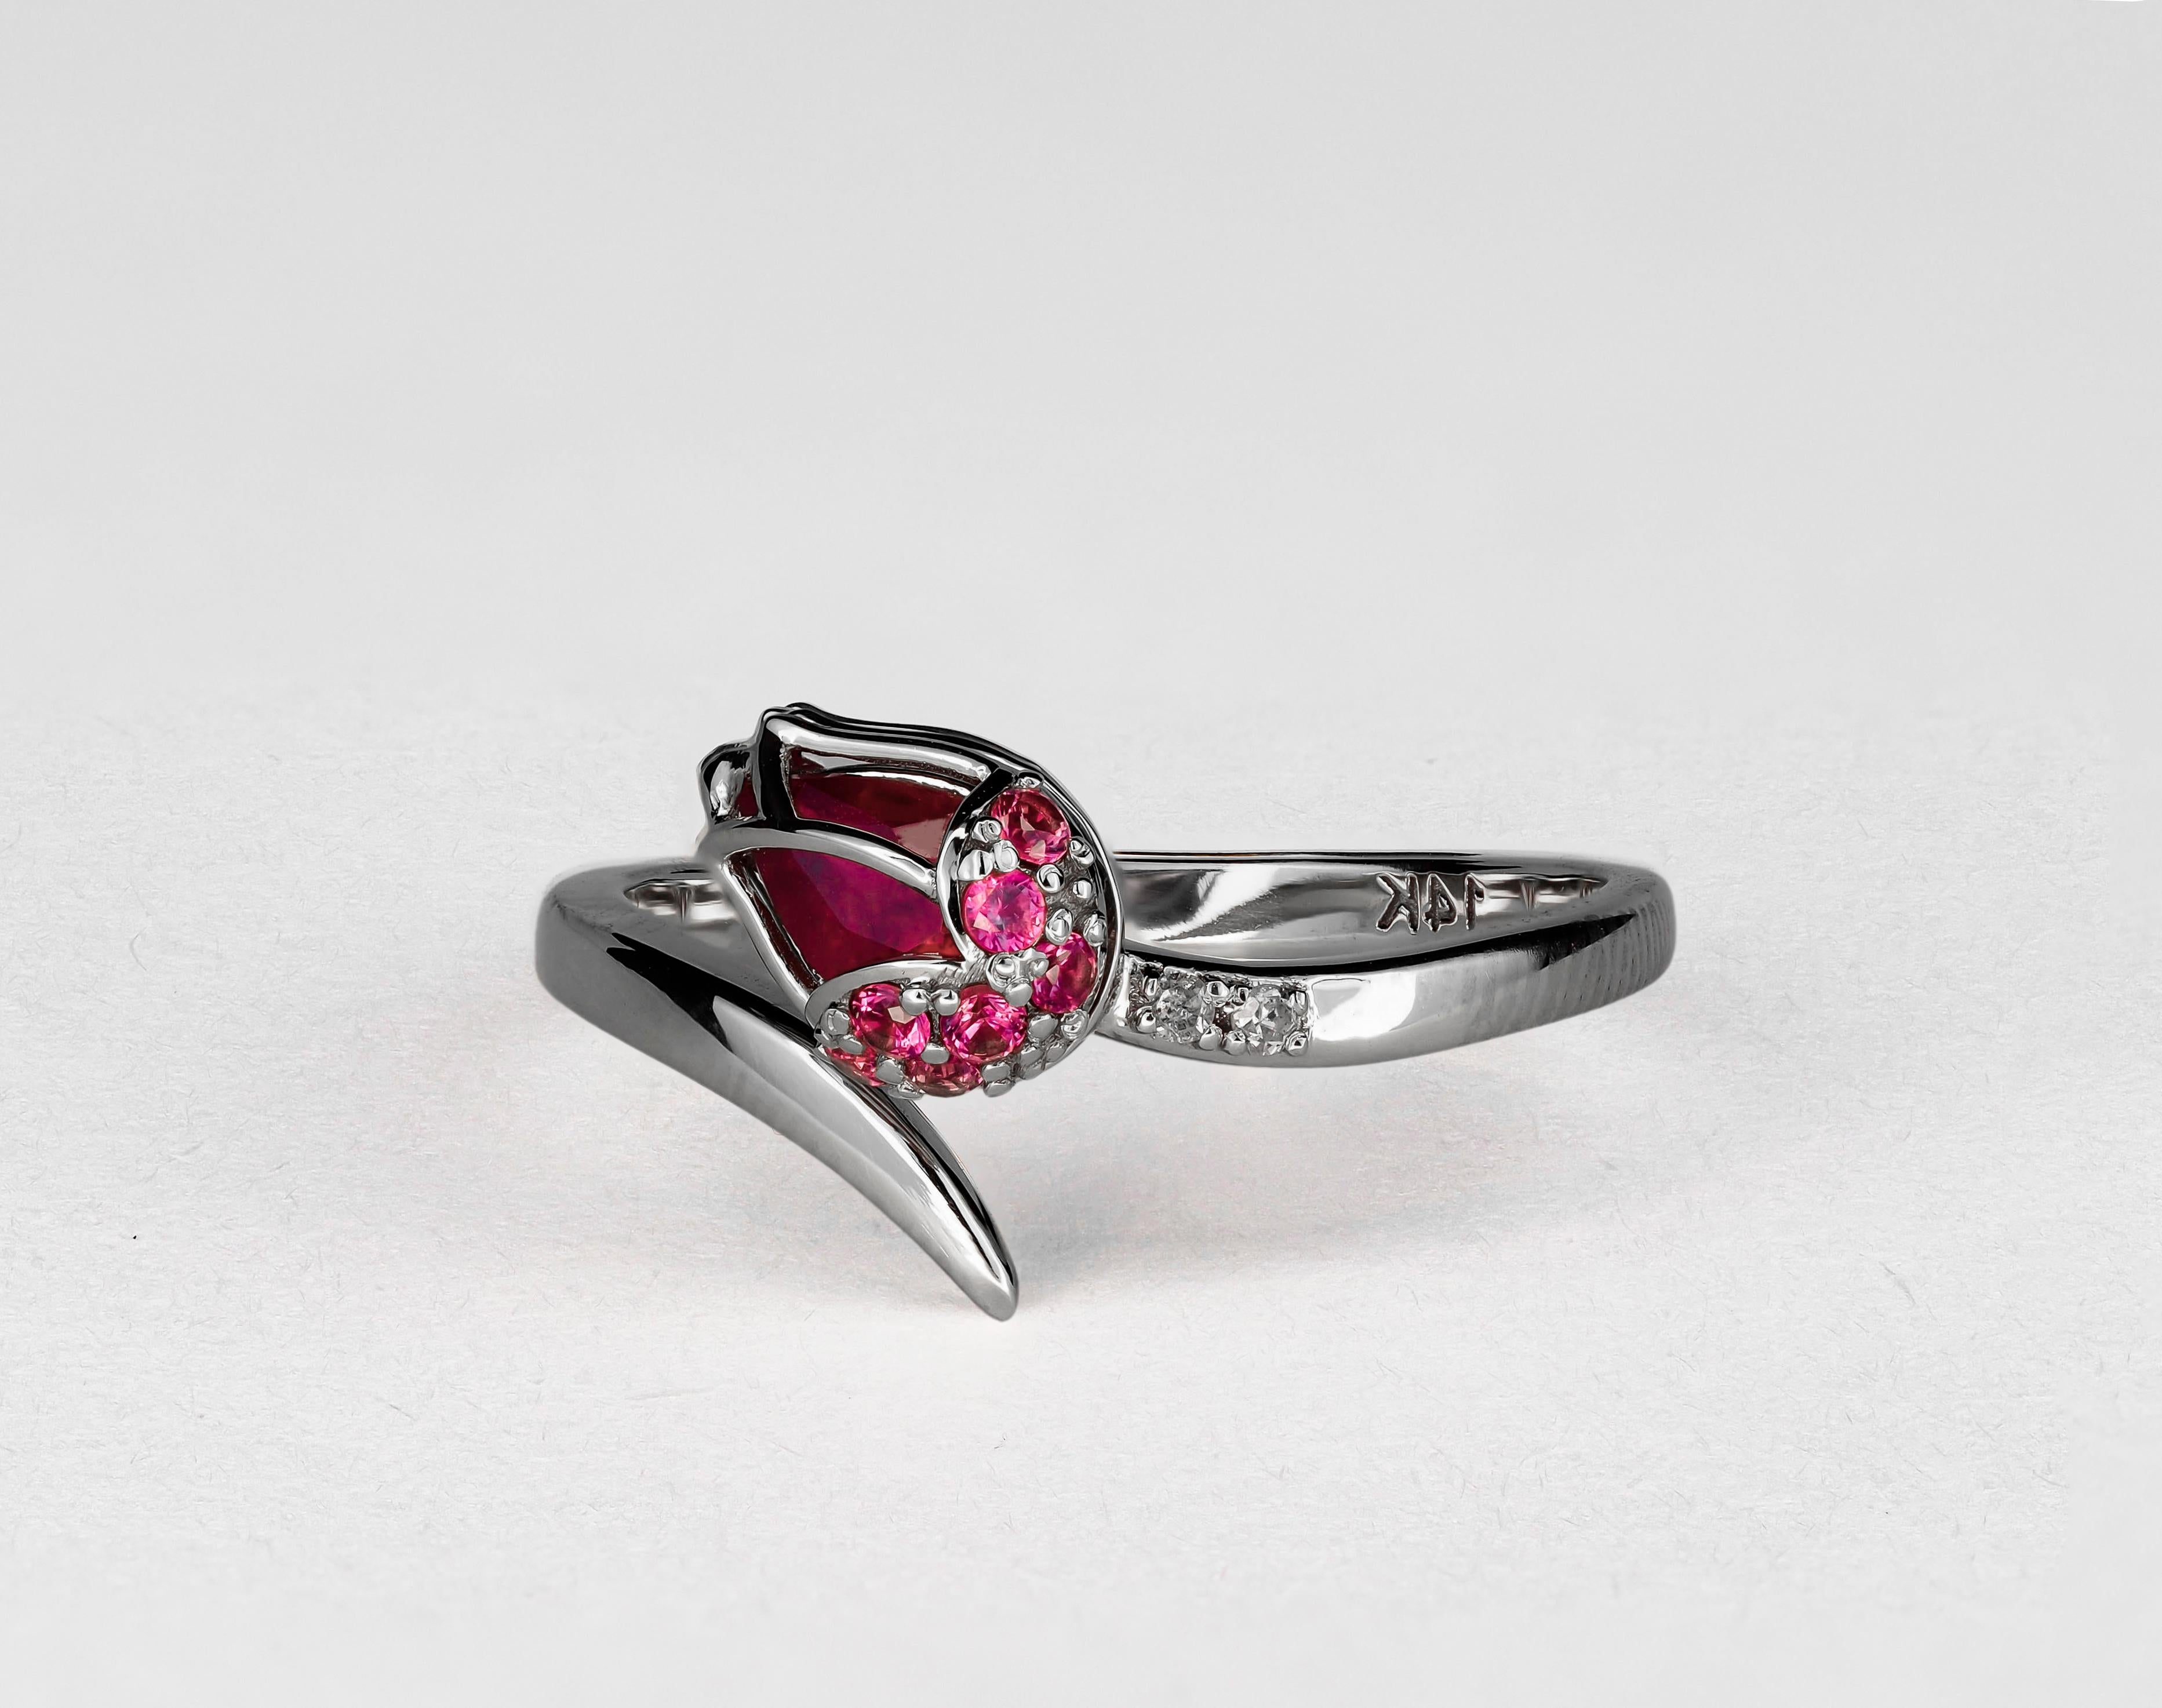 For Sale:  14 karat Gold Ring with Ruby. Gold tulip ring. July birthstone ruby ring 2